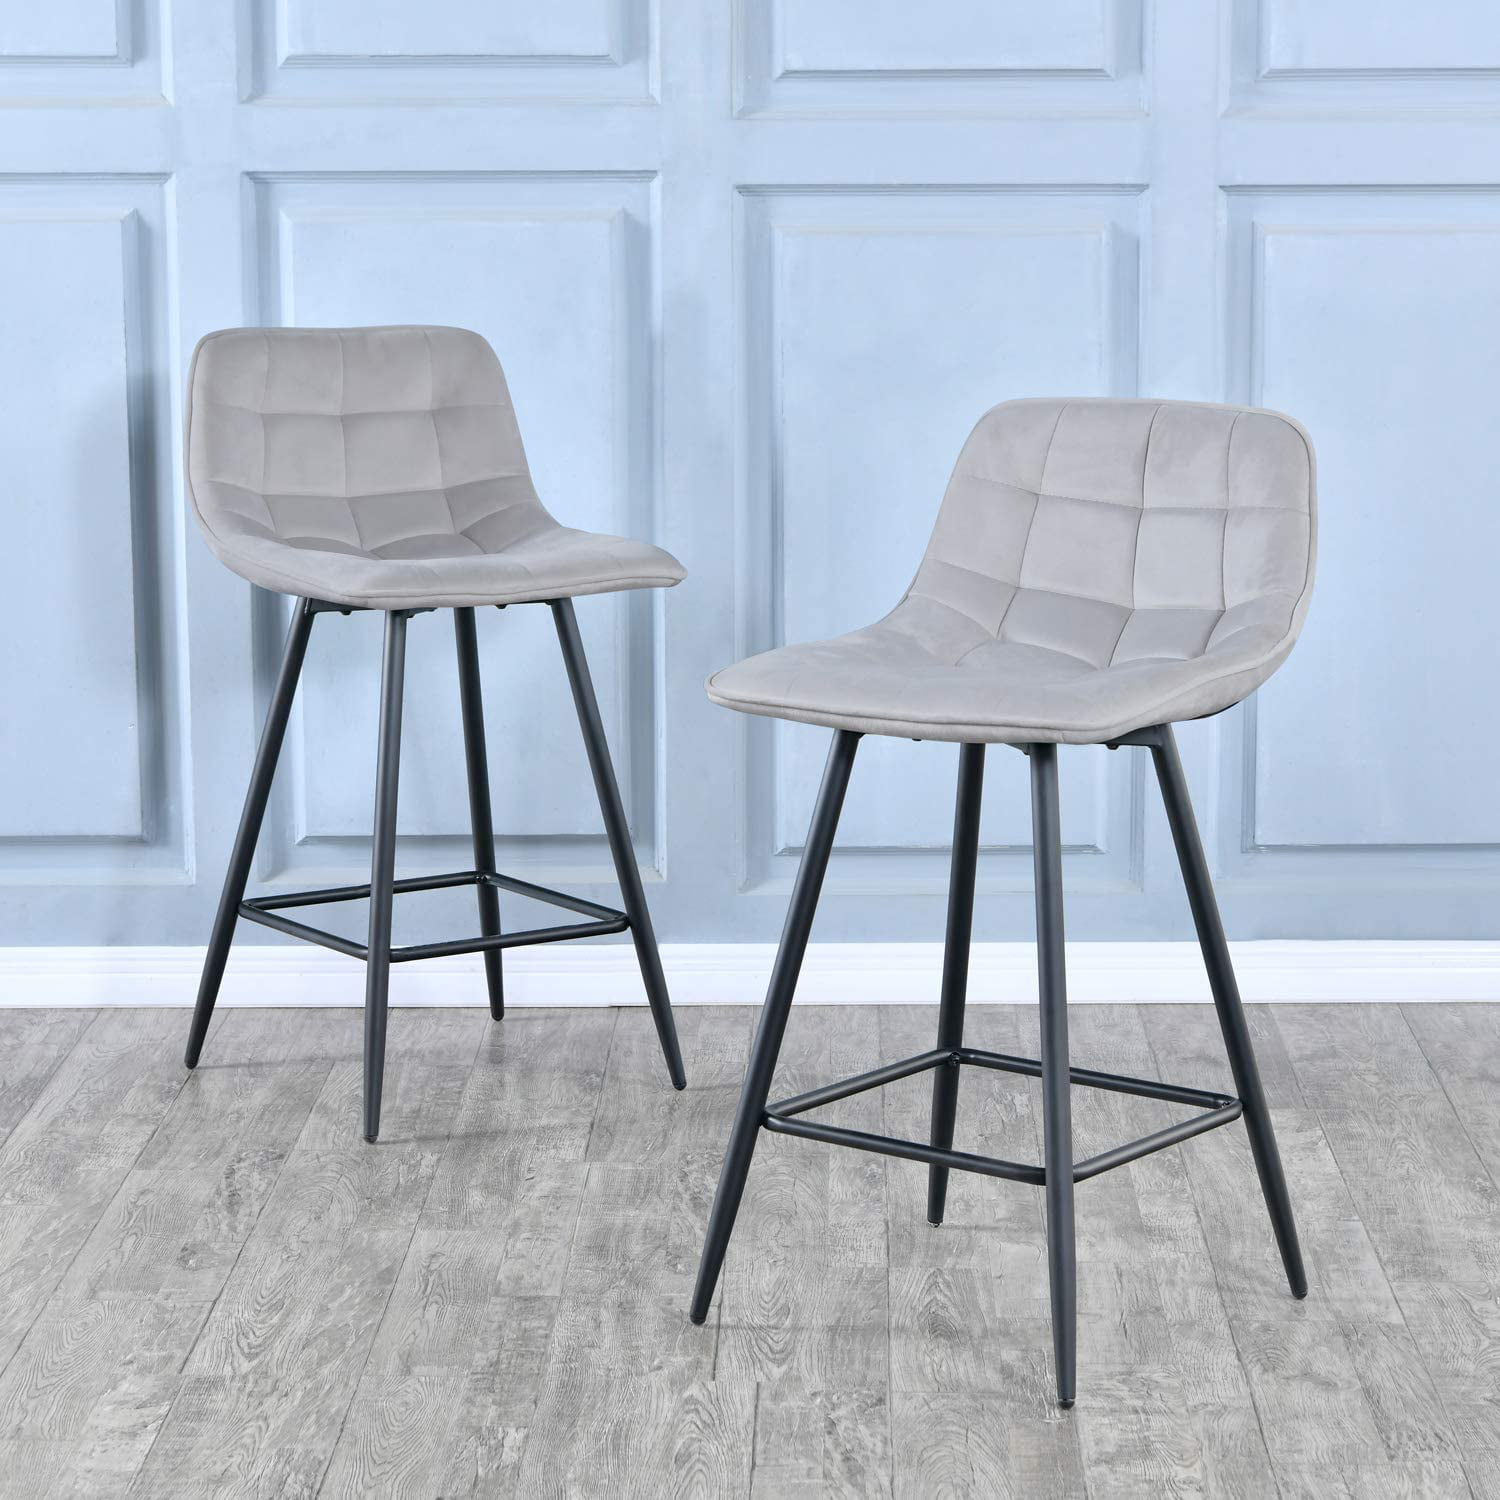 TUKAILAI Bar Stools Set of 2 With Velvet Covered Backrest and Metal Footrest and Base for Breakfast Bar Counter Kitchen and Home Blue Velvet Chairs